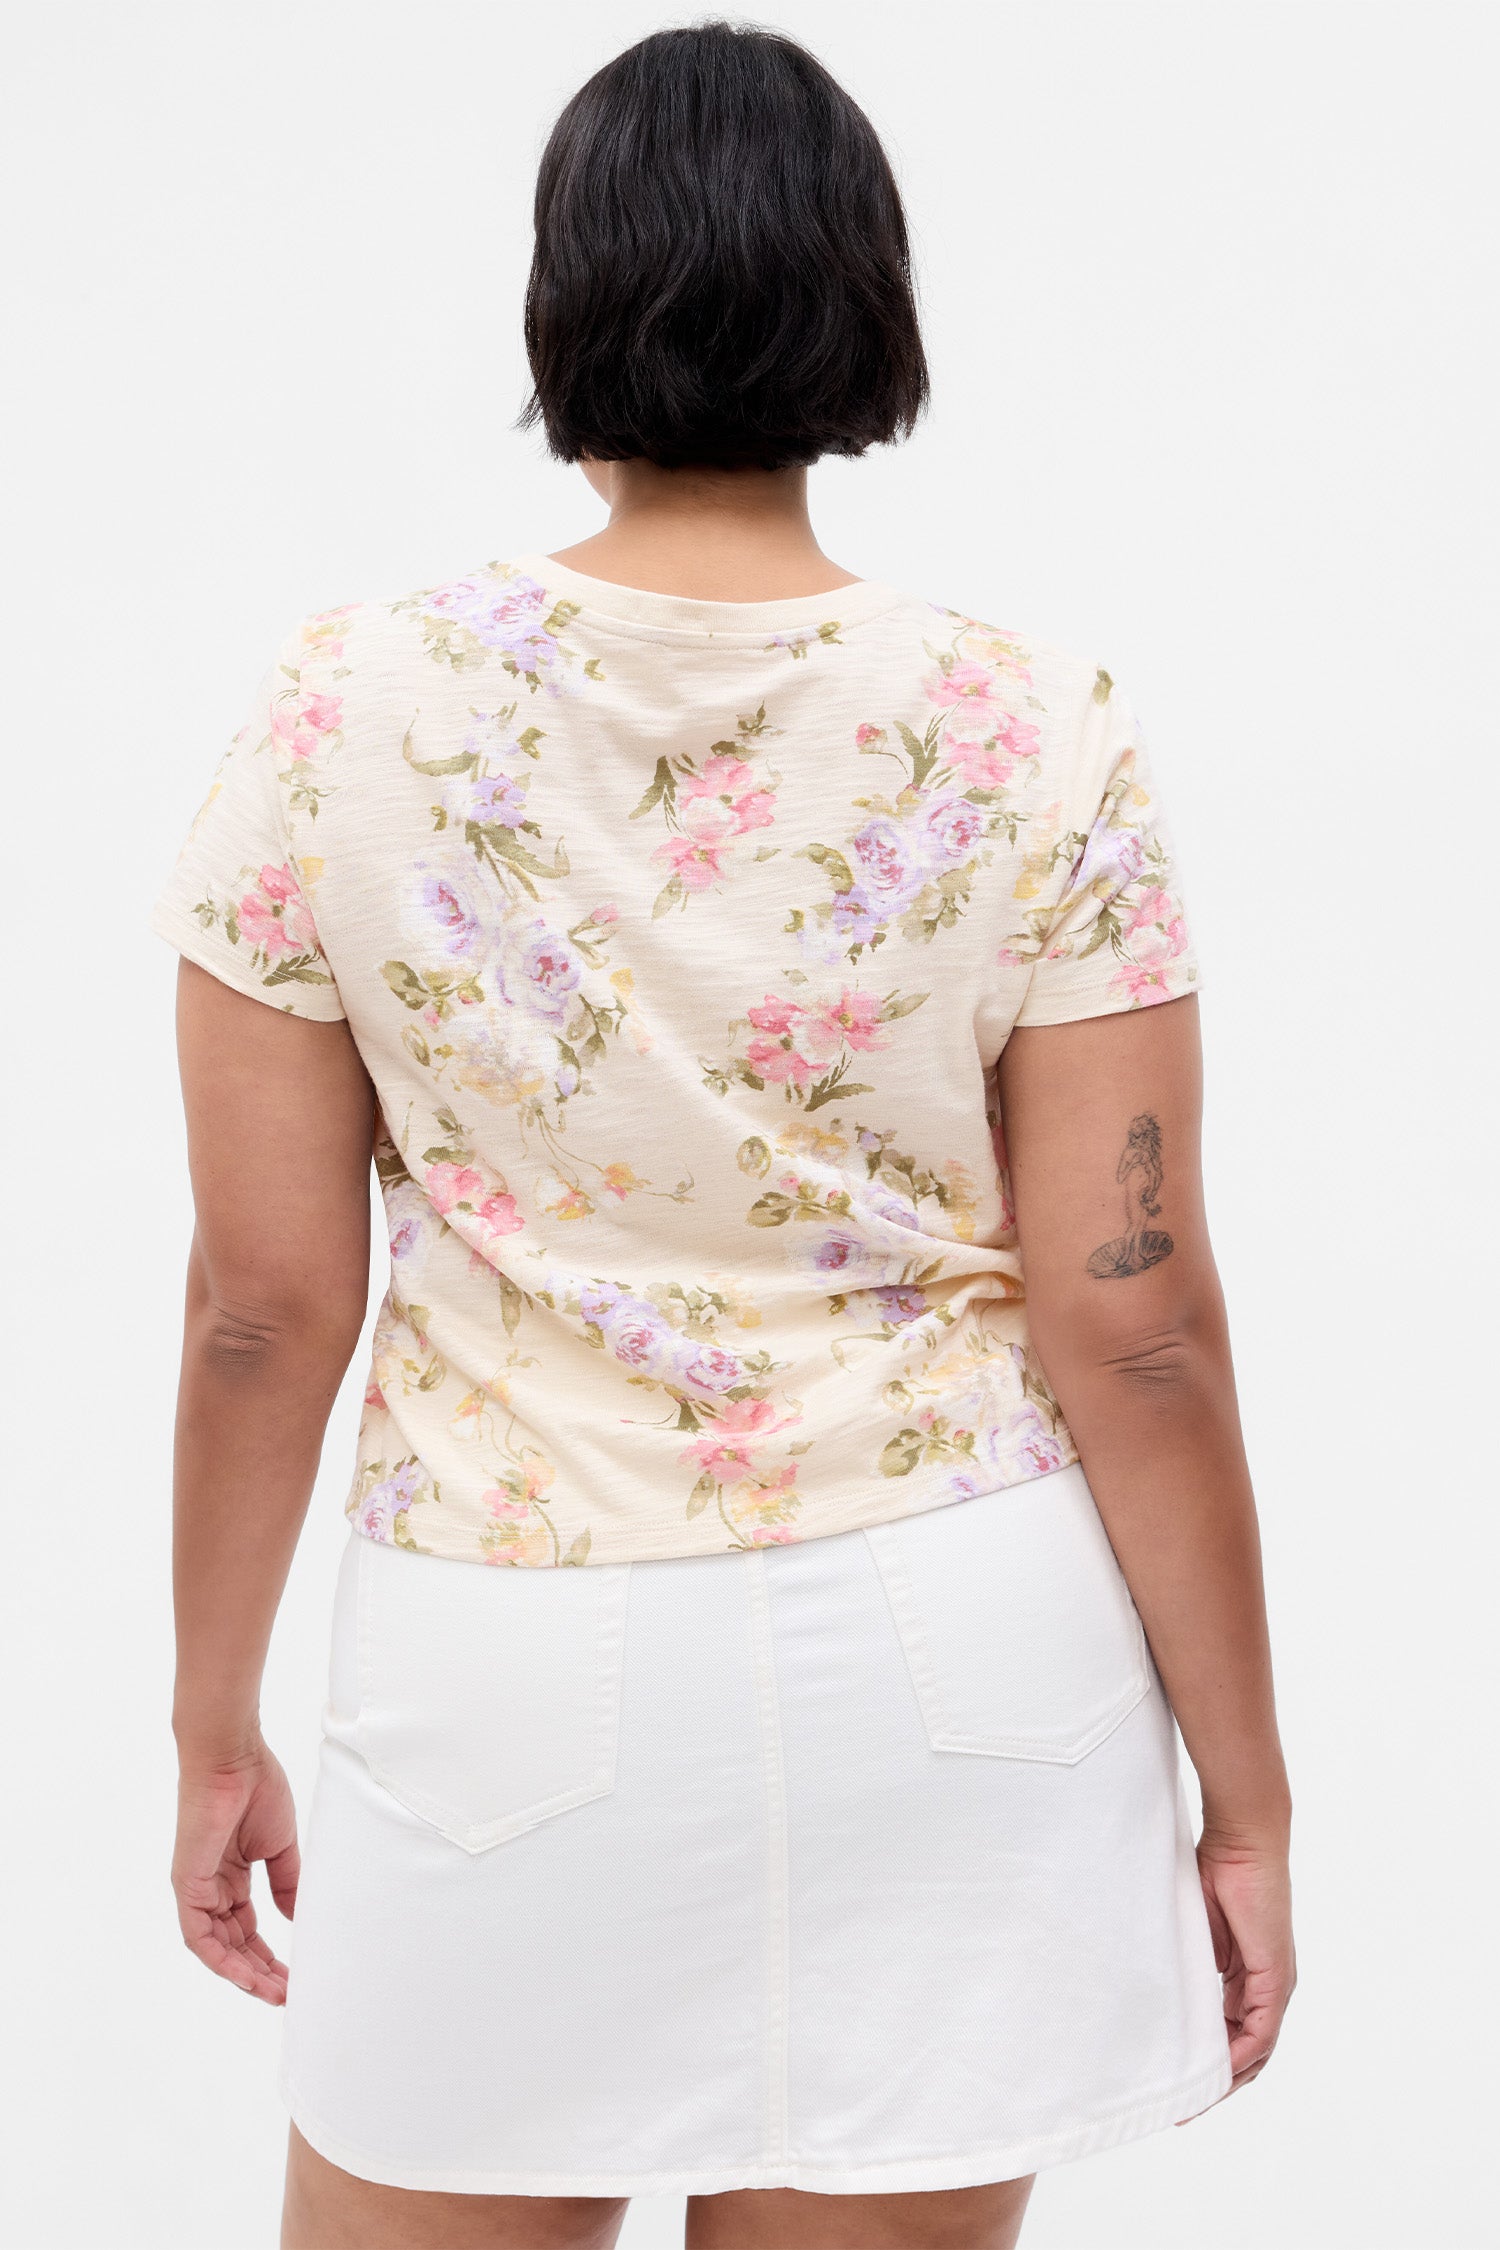 Back image of model wearing cream floral t-shirt with pink, purple, yellow, and green floral print